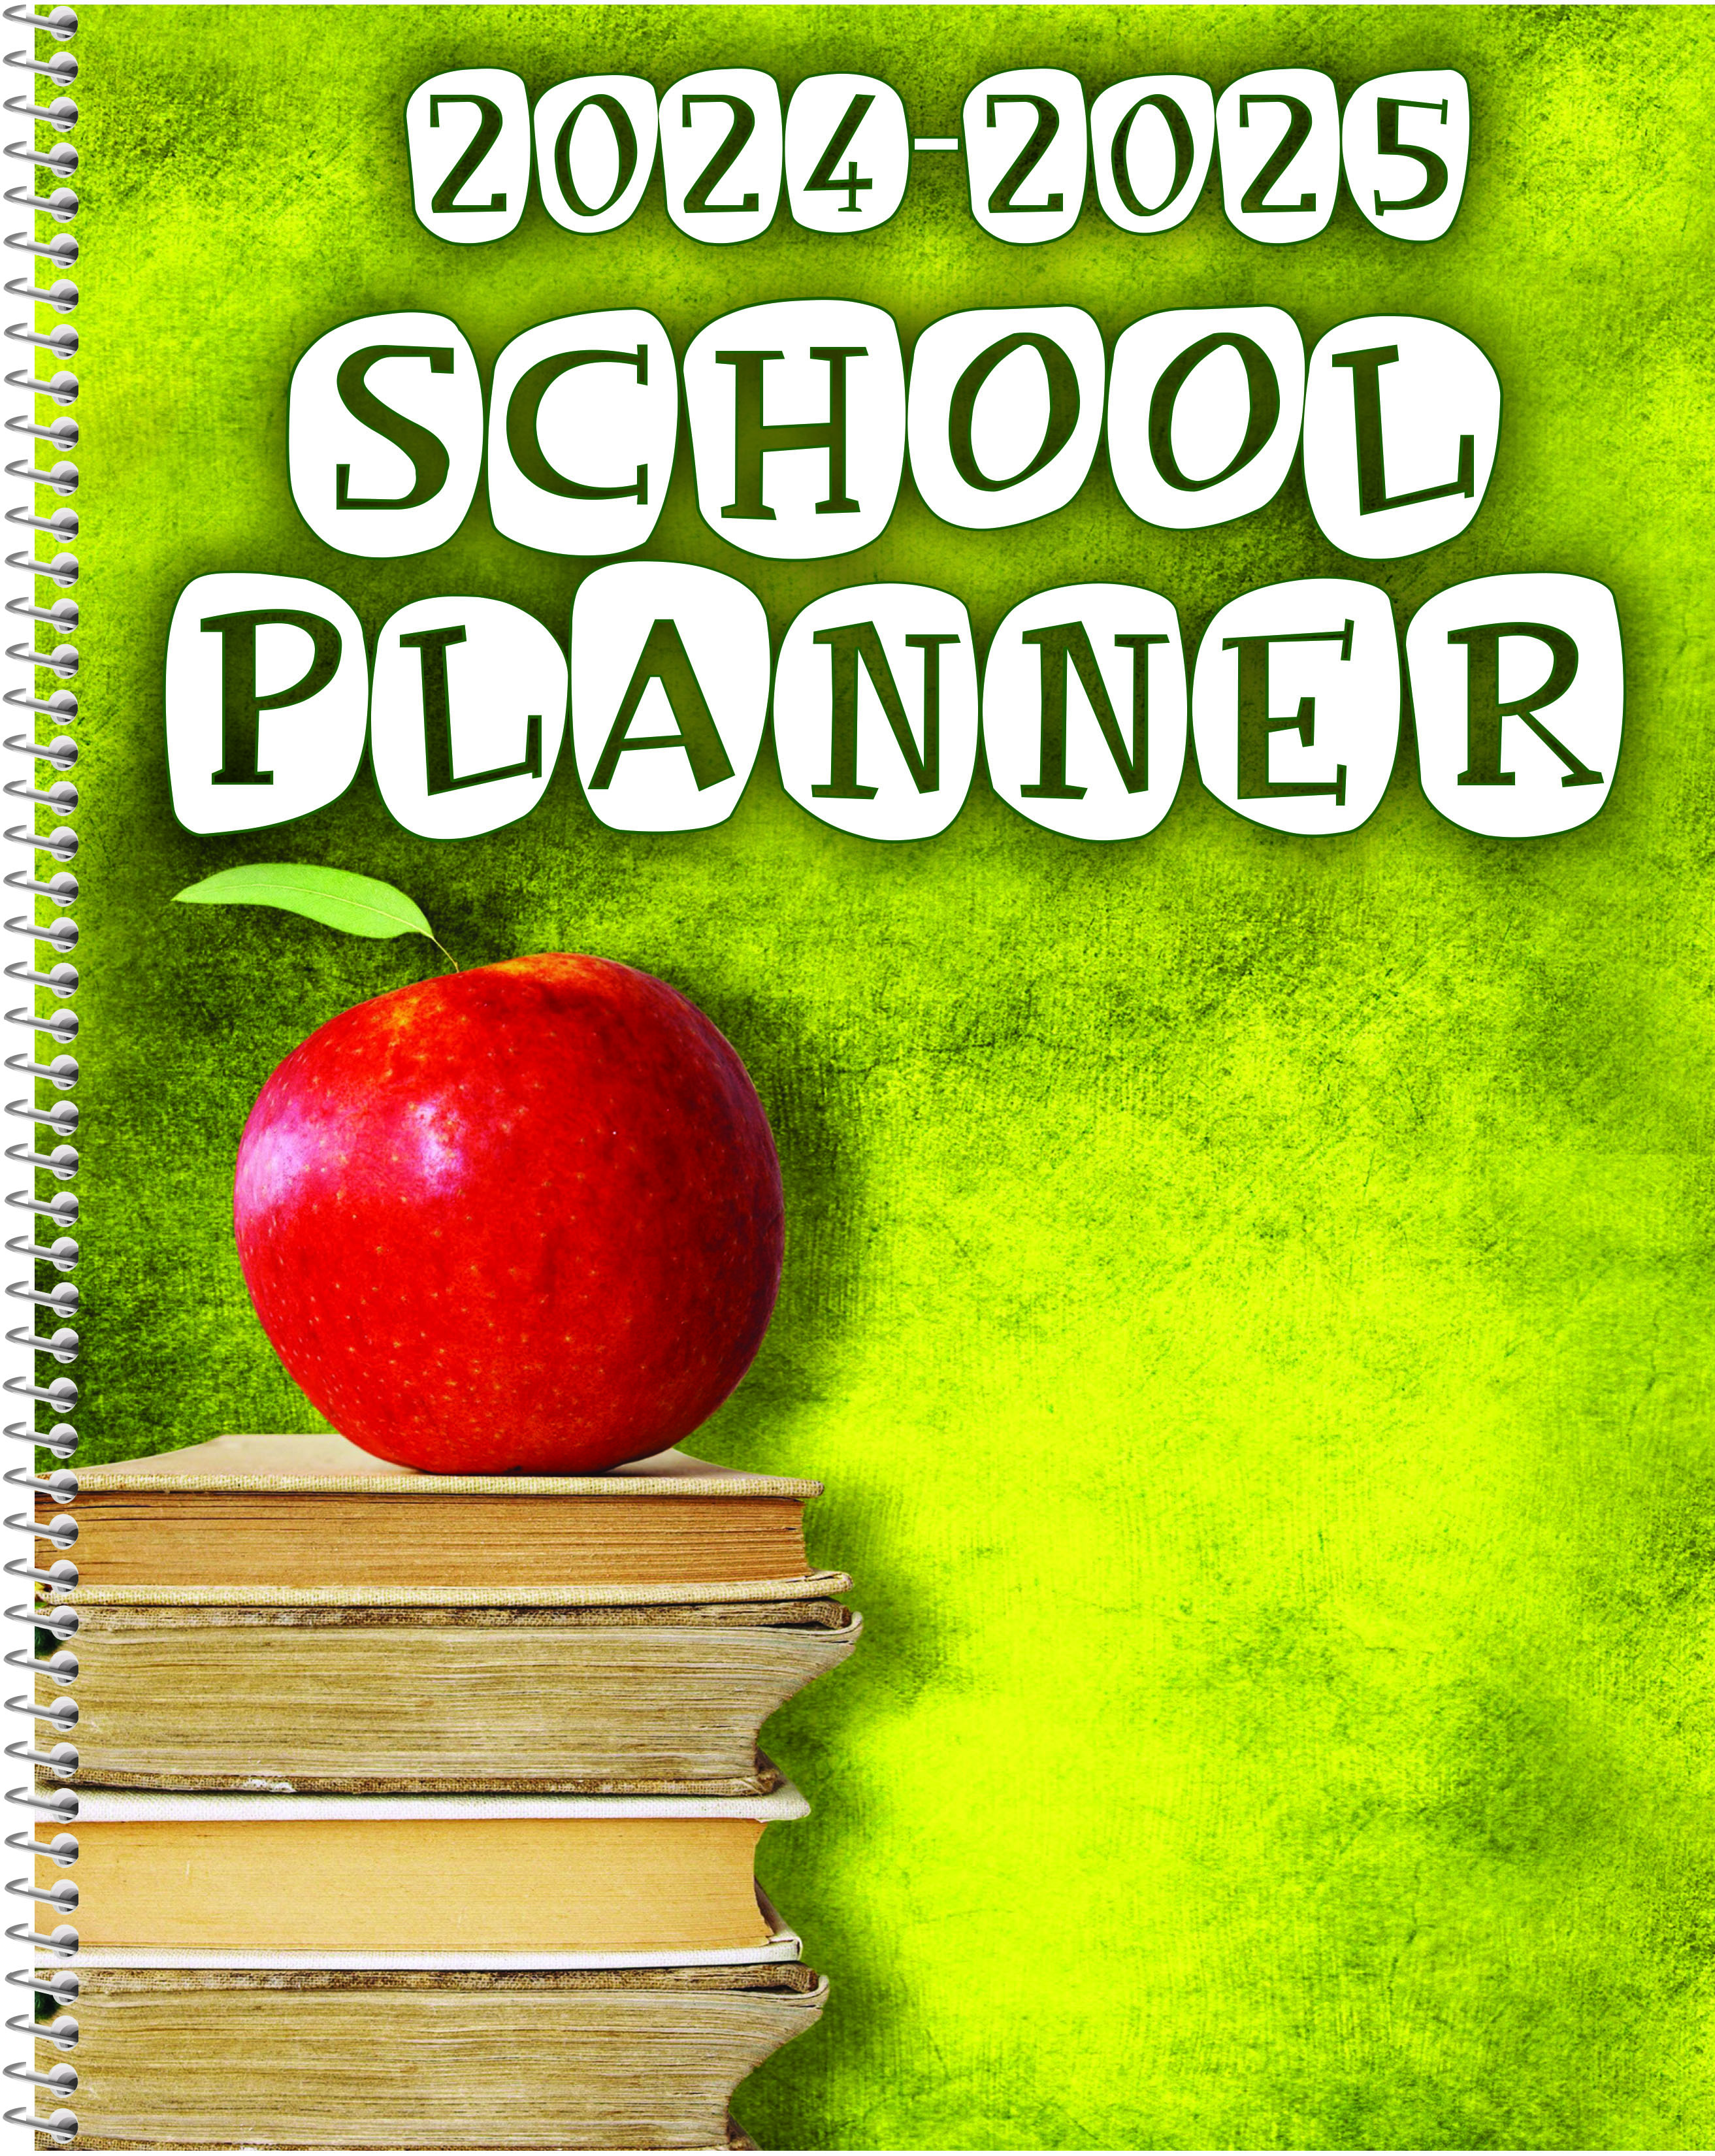 Primary Planner